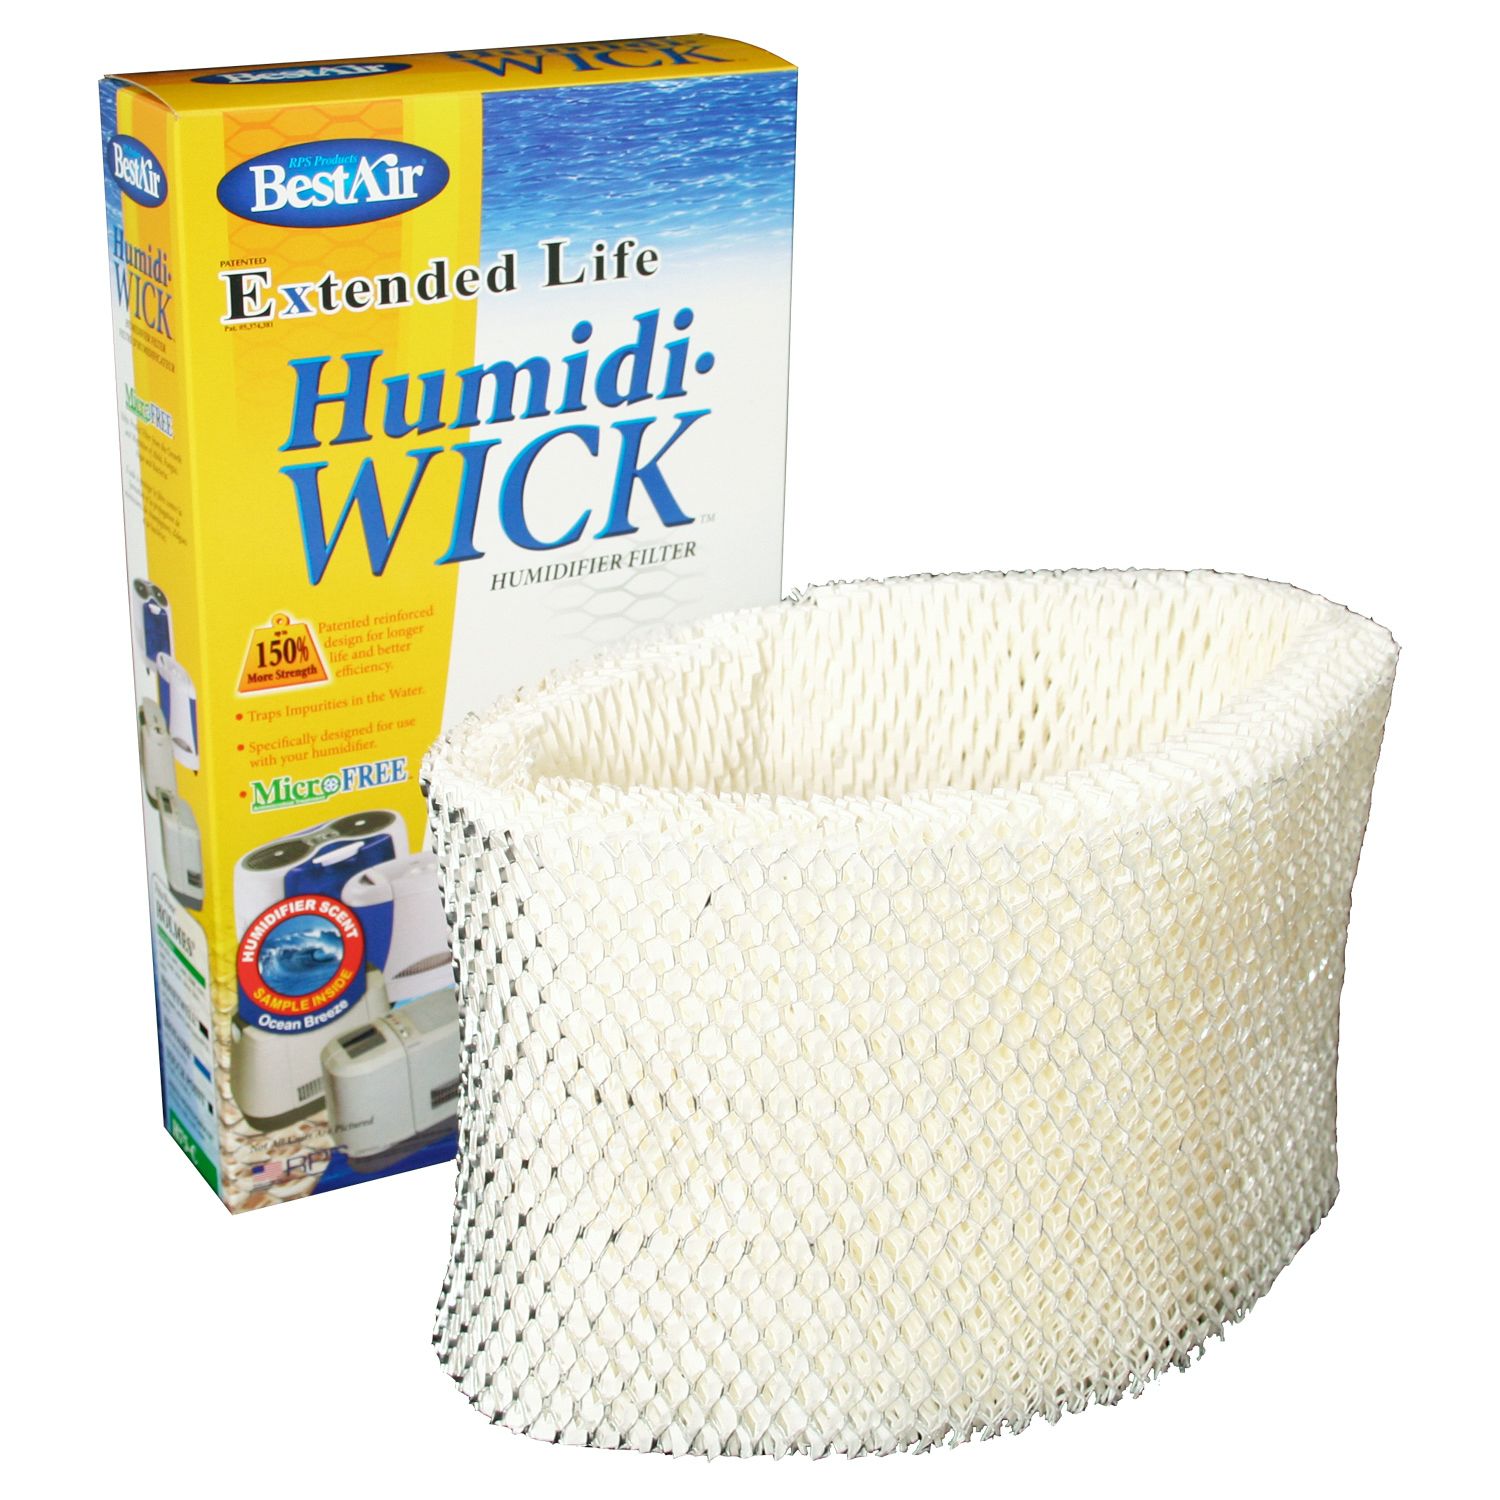 NEW BEST AIR EXTENDED LIFE HUMIDI WICK H75C